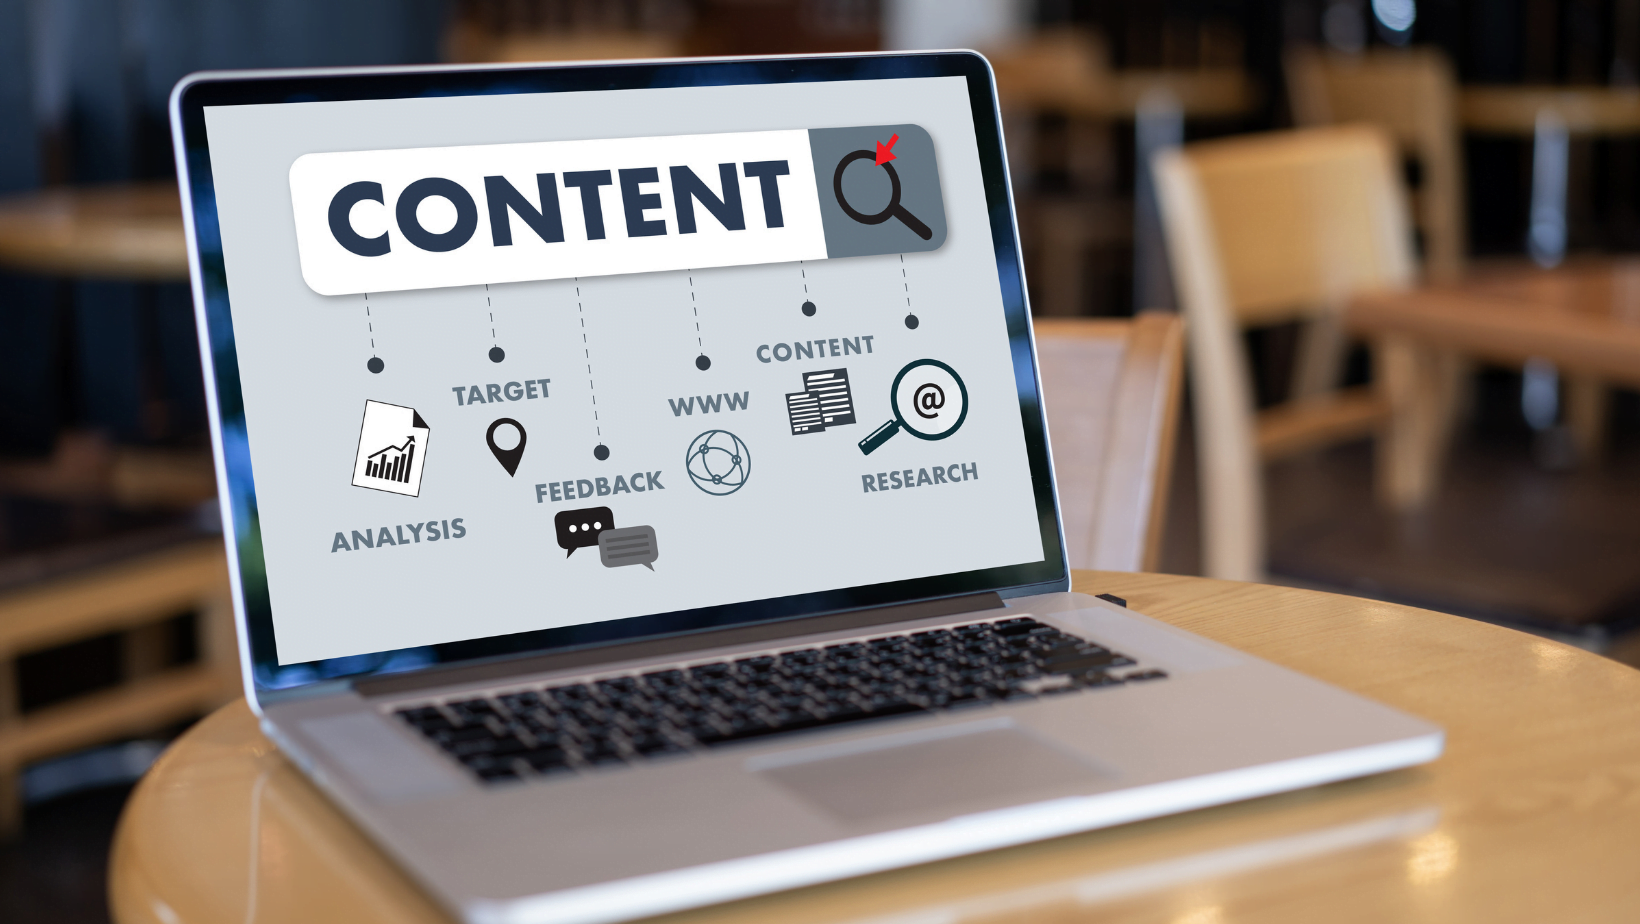 How can a Digital Marketing firm assist with our content creation?